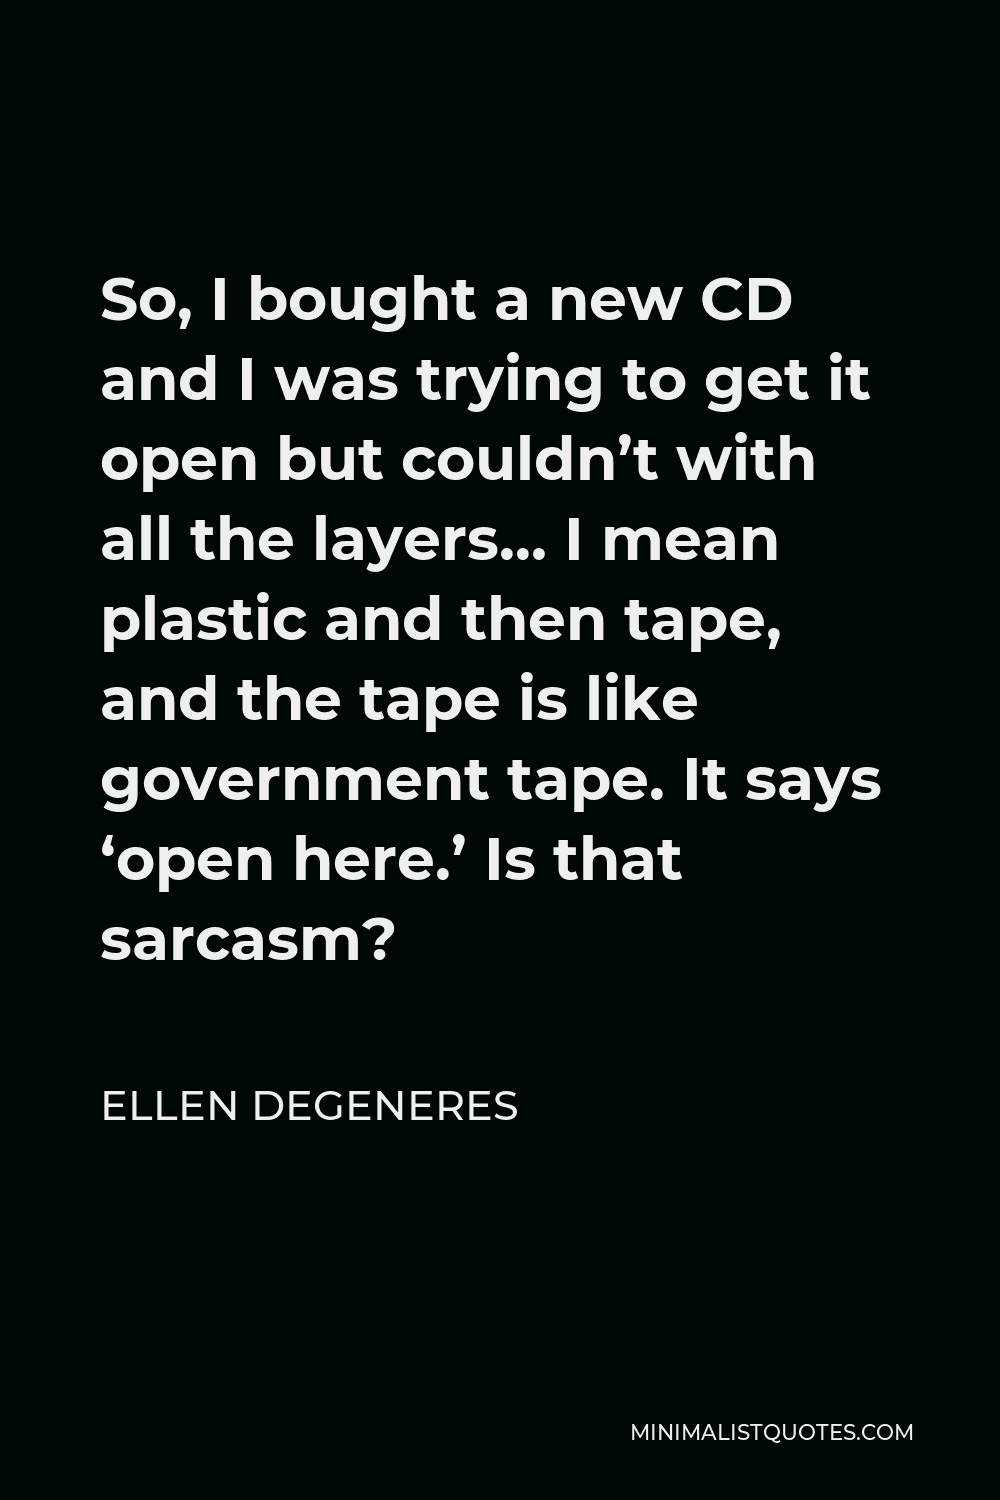 Ellen DeGeneres Quote - So, I bought a new CD and I was trying to get it open but couldn’t with all the layers… I mean plastic and then tape, and the tape is like government tape. It says ‘open here.’ Is that sarcasm?